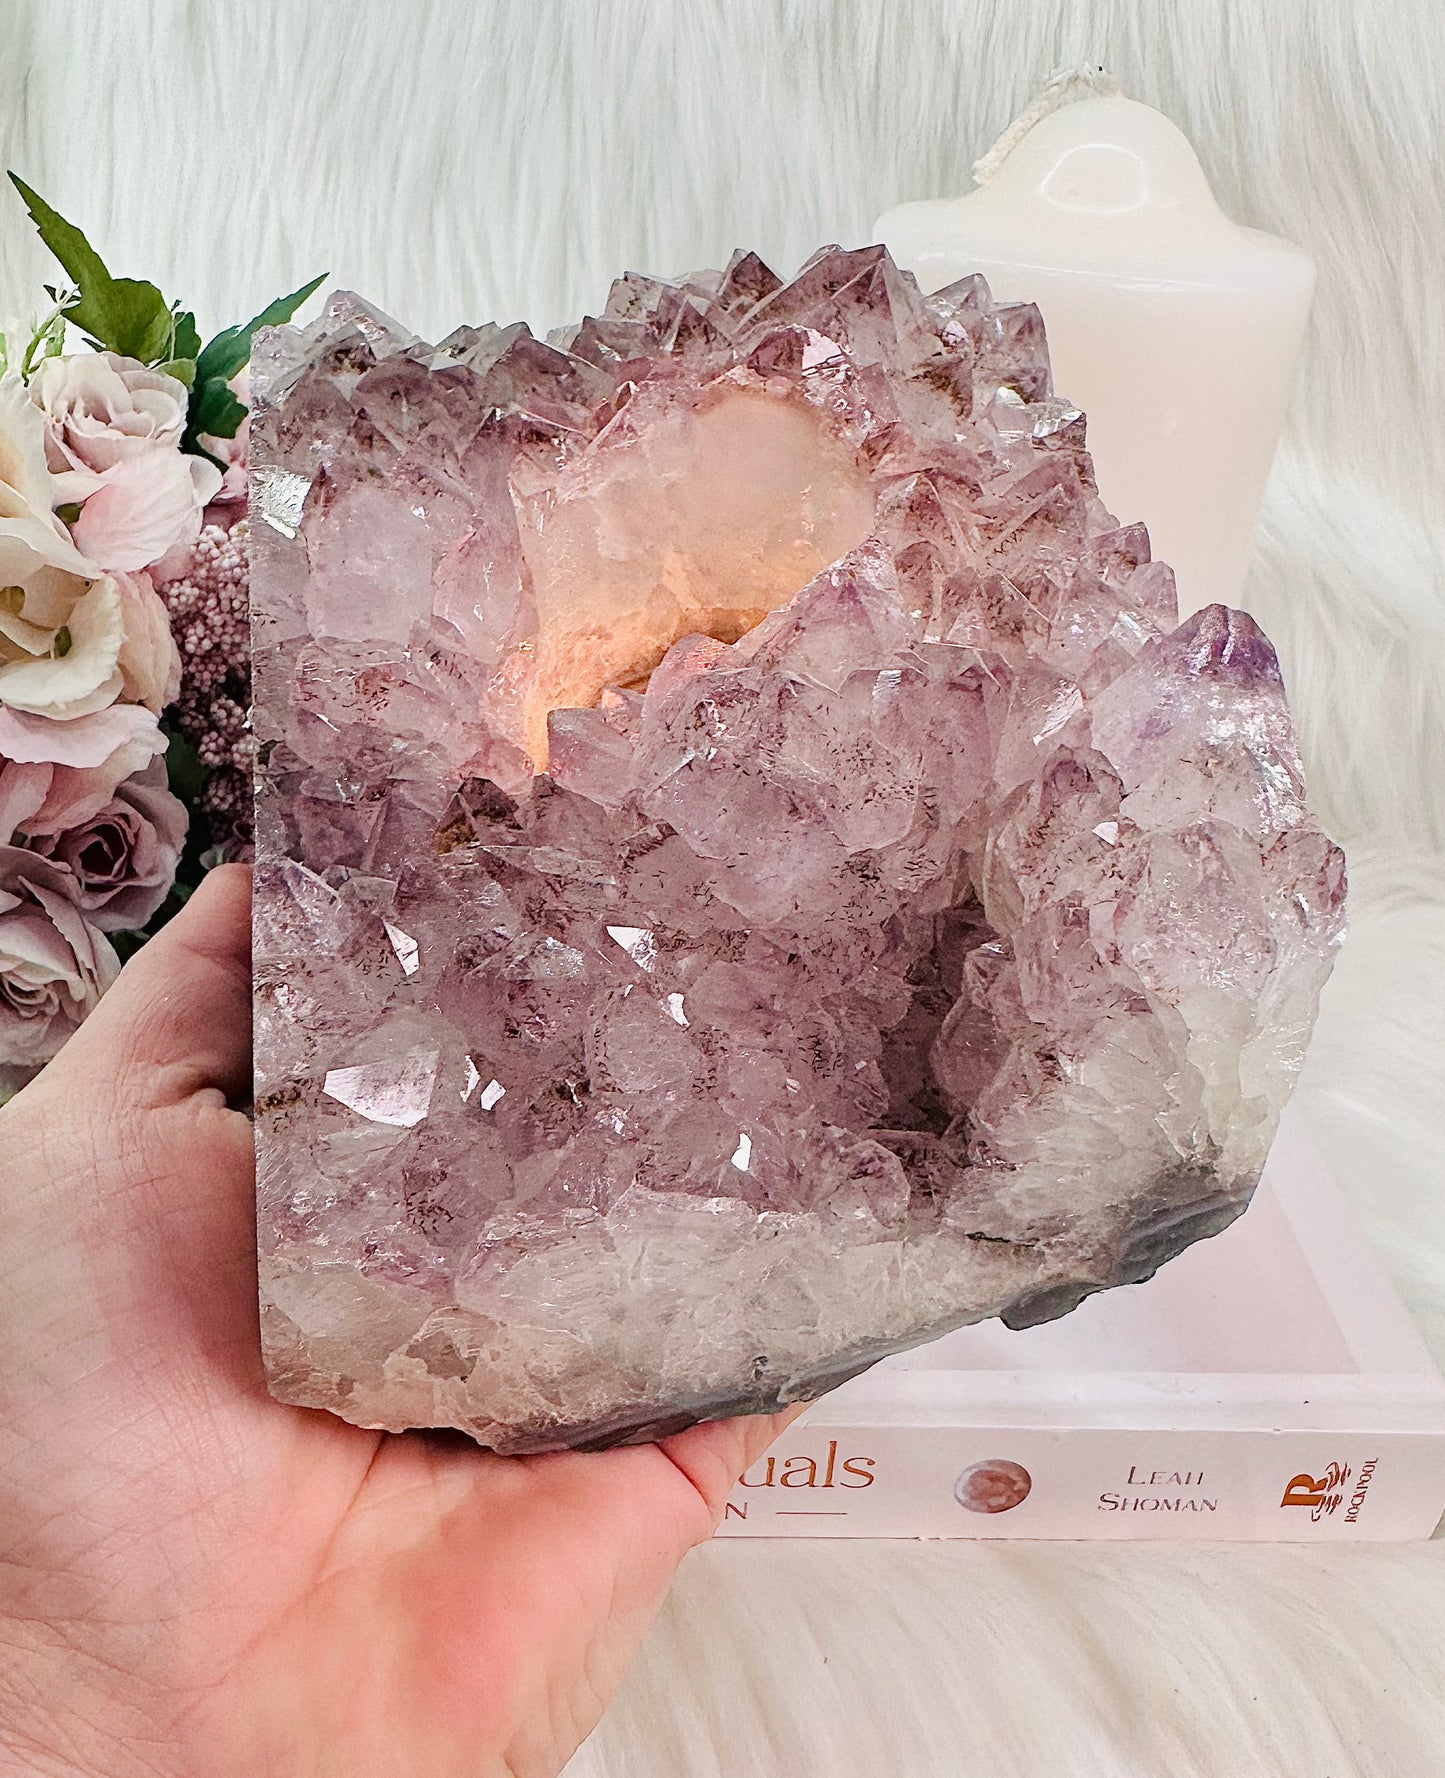 Stunning Huge 1.9KG Chunky Amethyst Cluster Candle Holder From Brazil Just Incredible